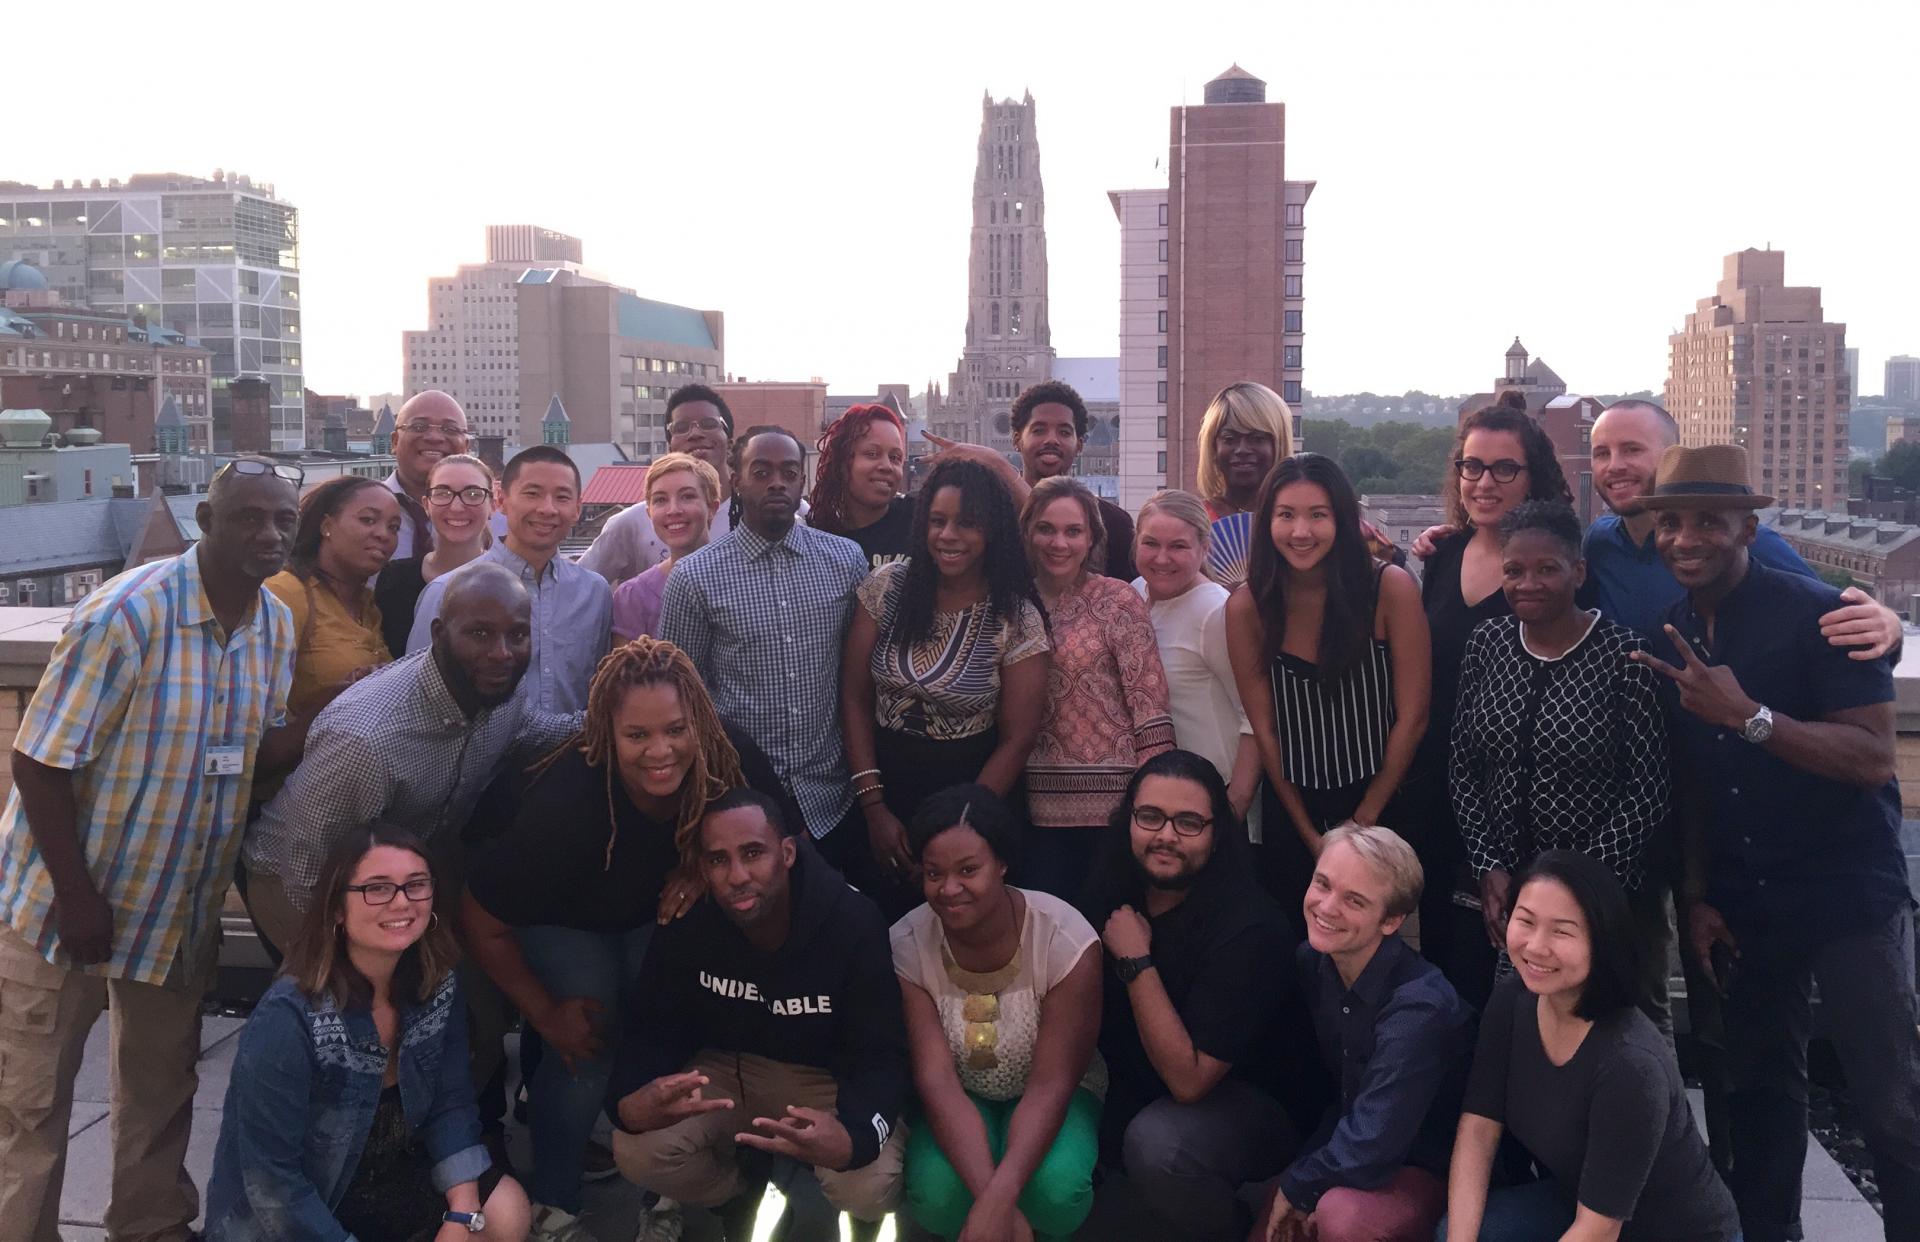 2016–17 Beyond the Bars Fellows from many schools across Columbia (Social Work, Teachers College, Columbia College, Arts, Public Health); other colleges (Rutgers, New York University, Borough of Manhattan Community College); and a variety of community and government organizations (Osborne Association, Vera Institute of Justice, Red Umbrella Project, Fortune Society, VIBE magazine, Center for Court Innovations)